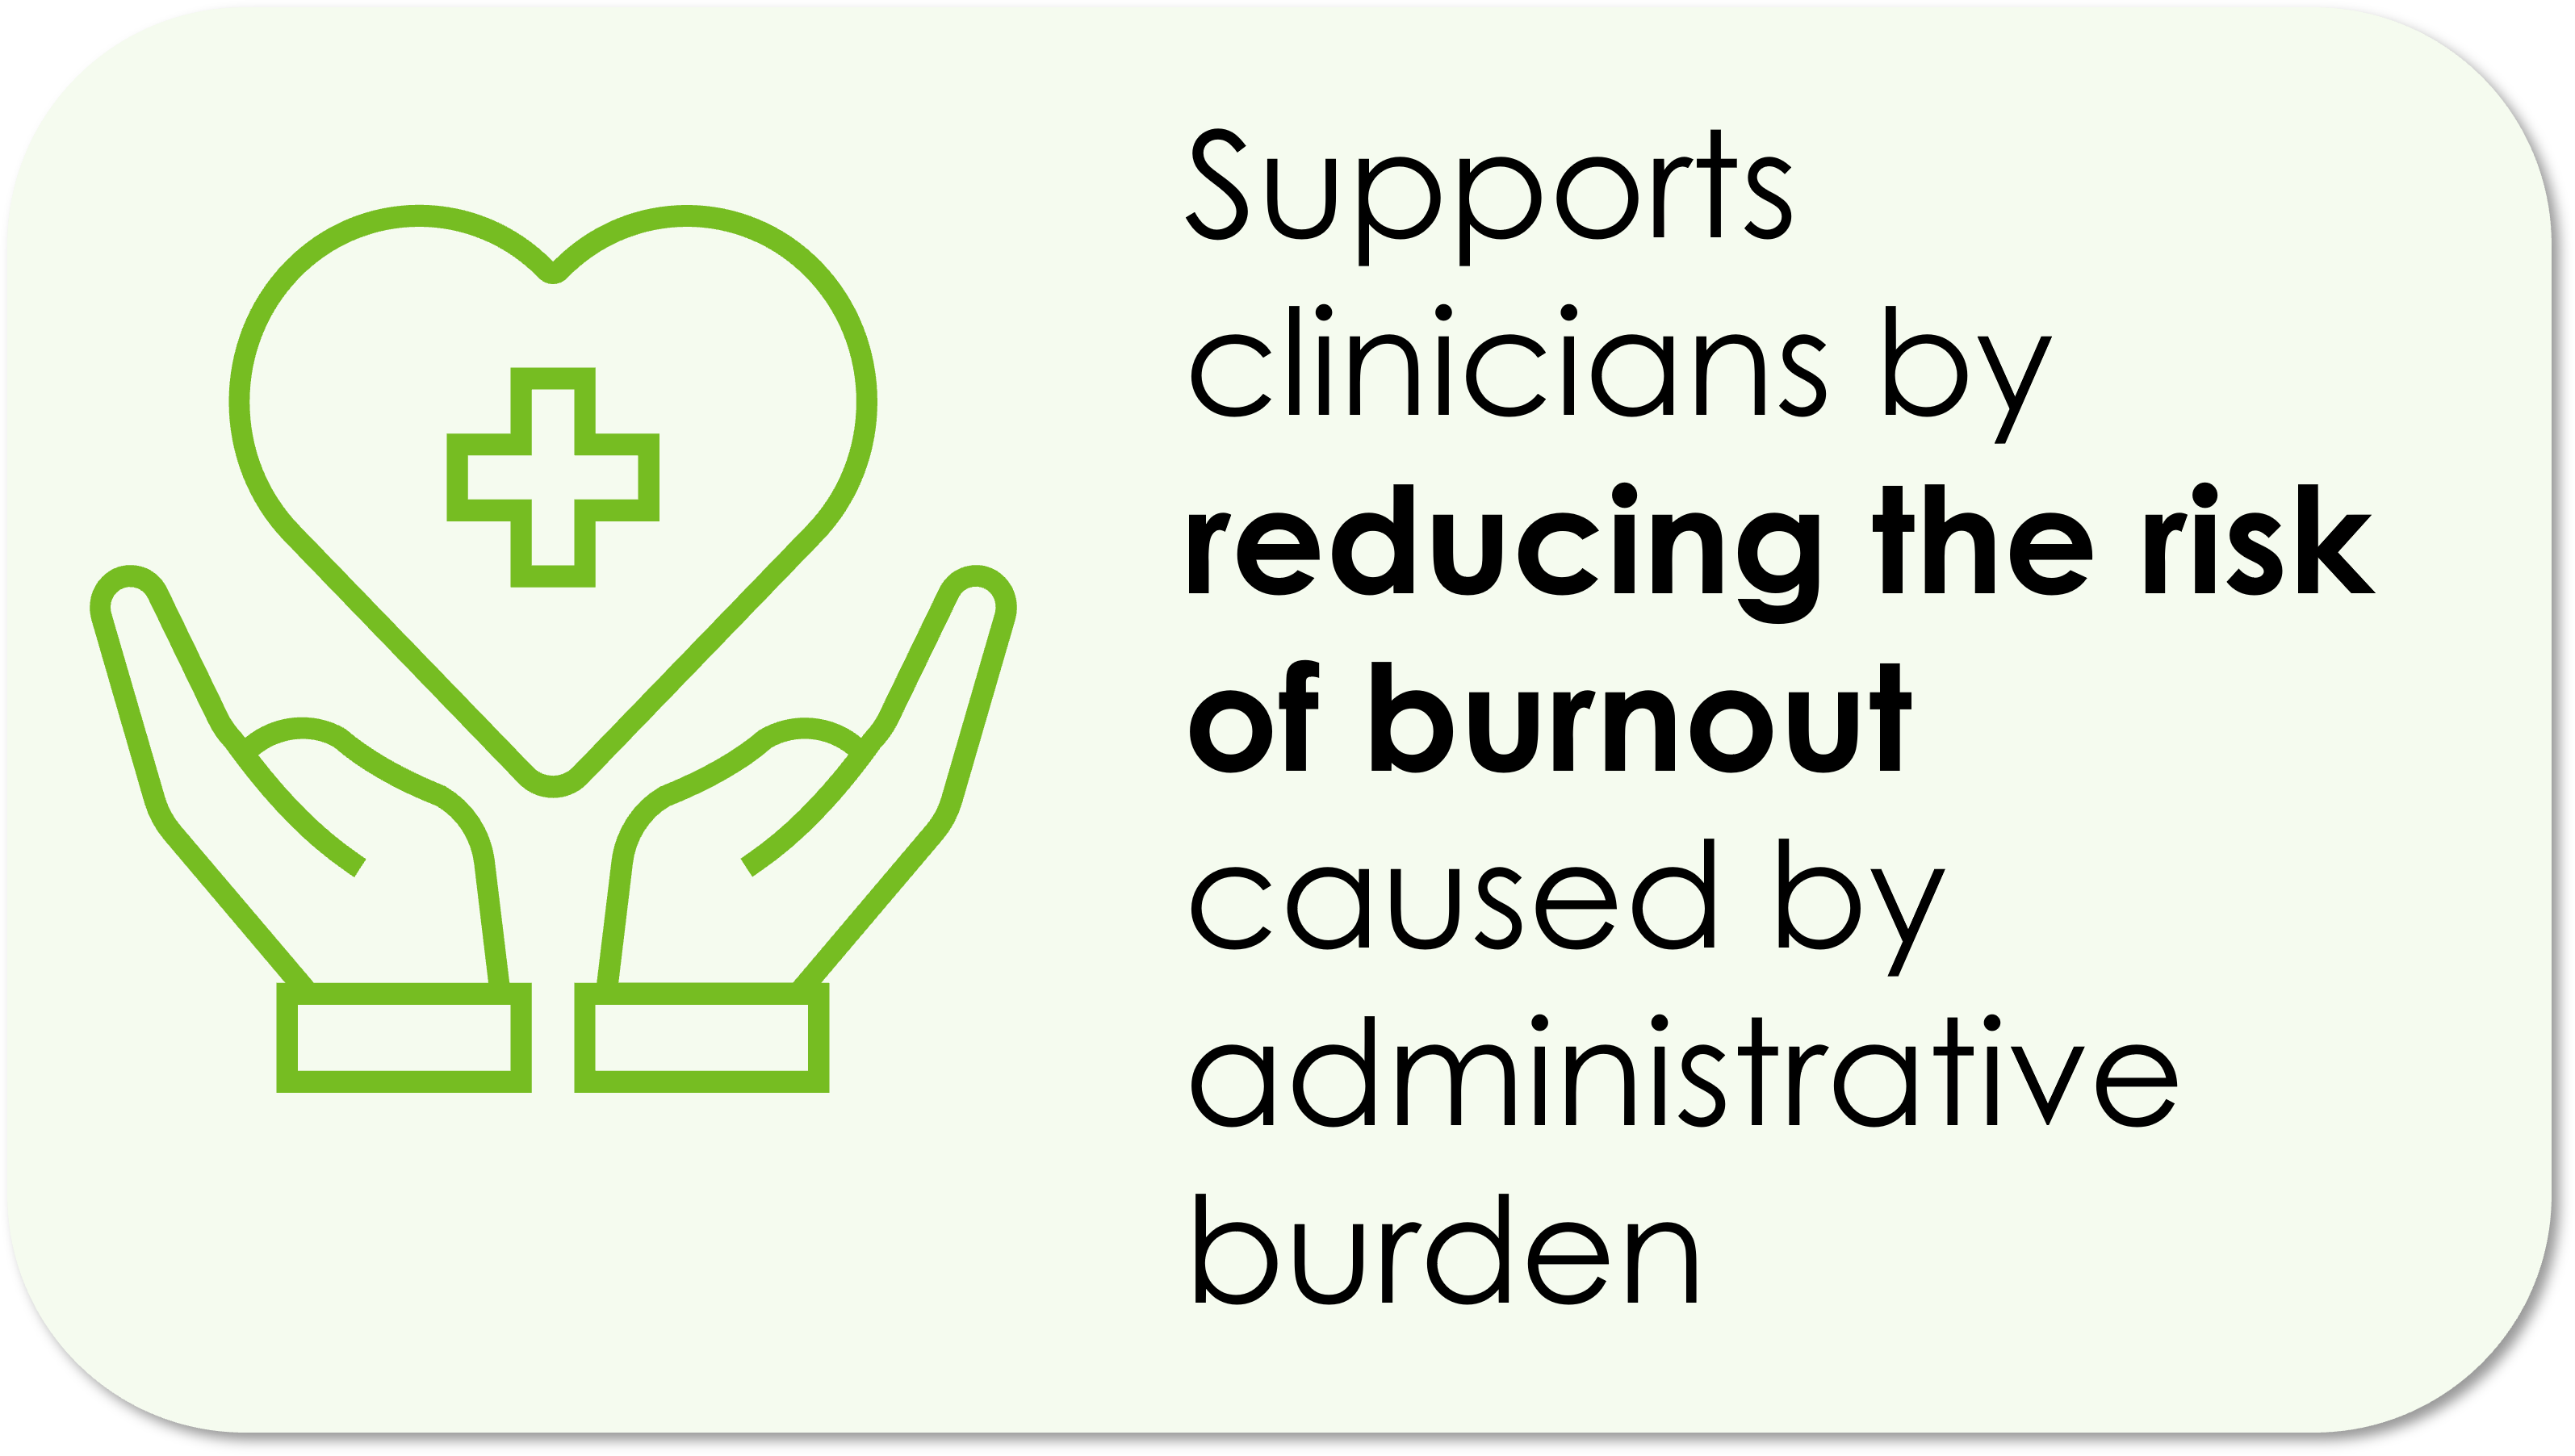 Supports clinicians by reducing the risk of burnout caused by administrative burden